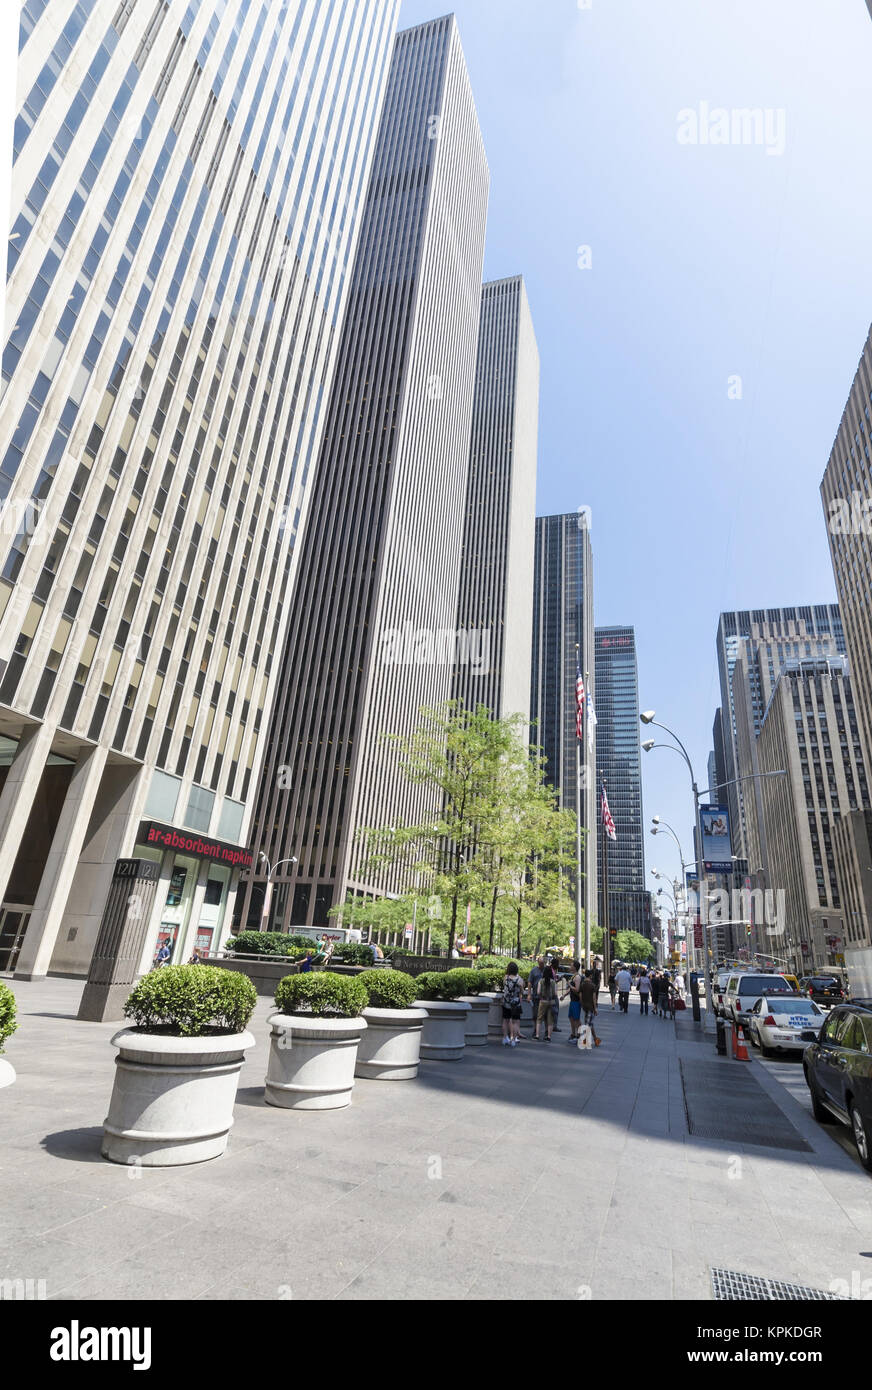 ⁴ᴷ⁶⁰ Walking NYC (Narrated) : Fifth Avenue from 60th Street to